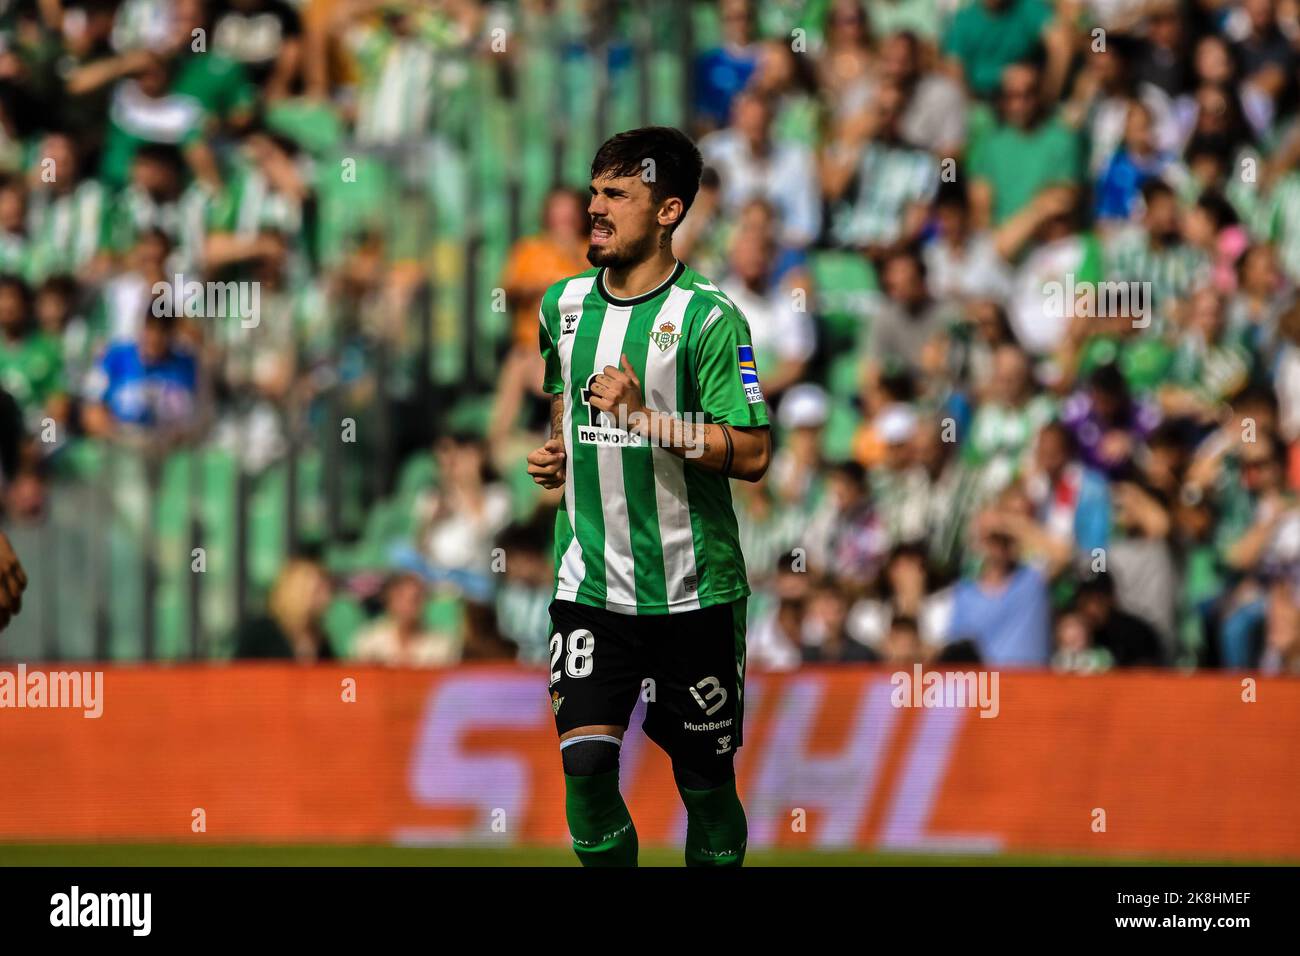 SEVILLA, SPAIN - OCTOBER 23: Rodri Sanchez of Real Betis Balompie during the match between Real Betis Balompie and Atletico de Madrid CF of La Liga Santander on August 27, 2022 at Mestalla in Valencia, Spain. (Photo by Samuel Carreño/PxImages) Stock Photo